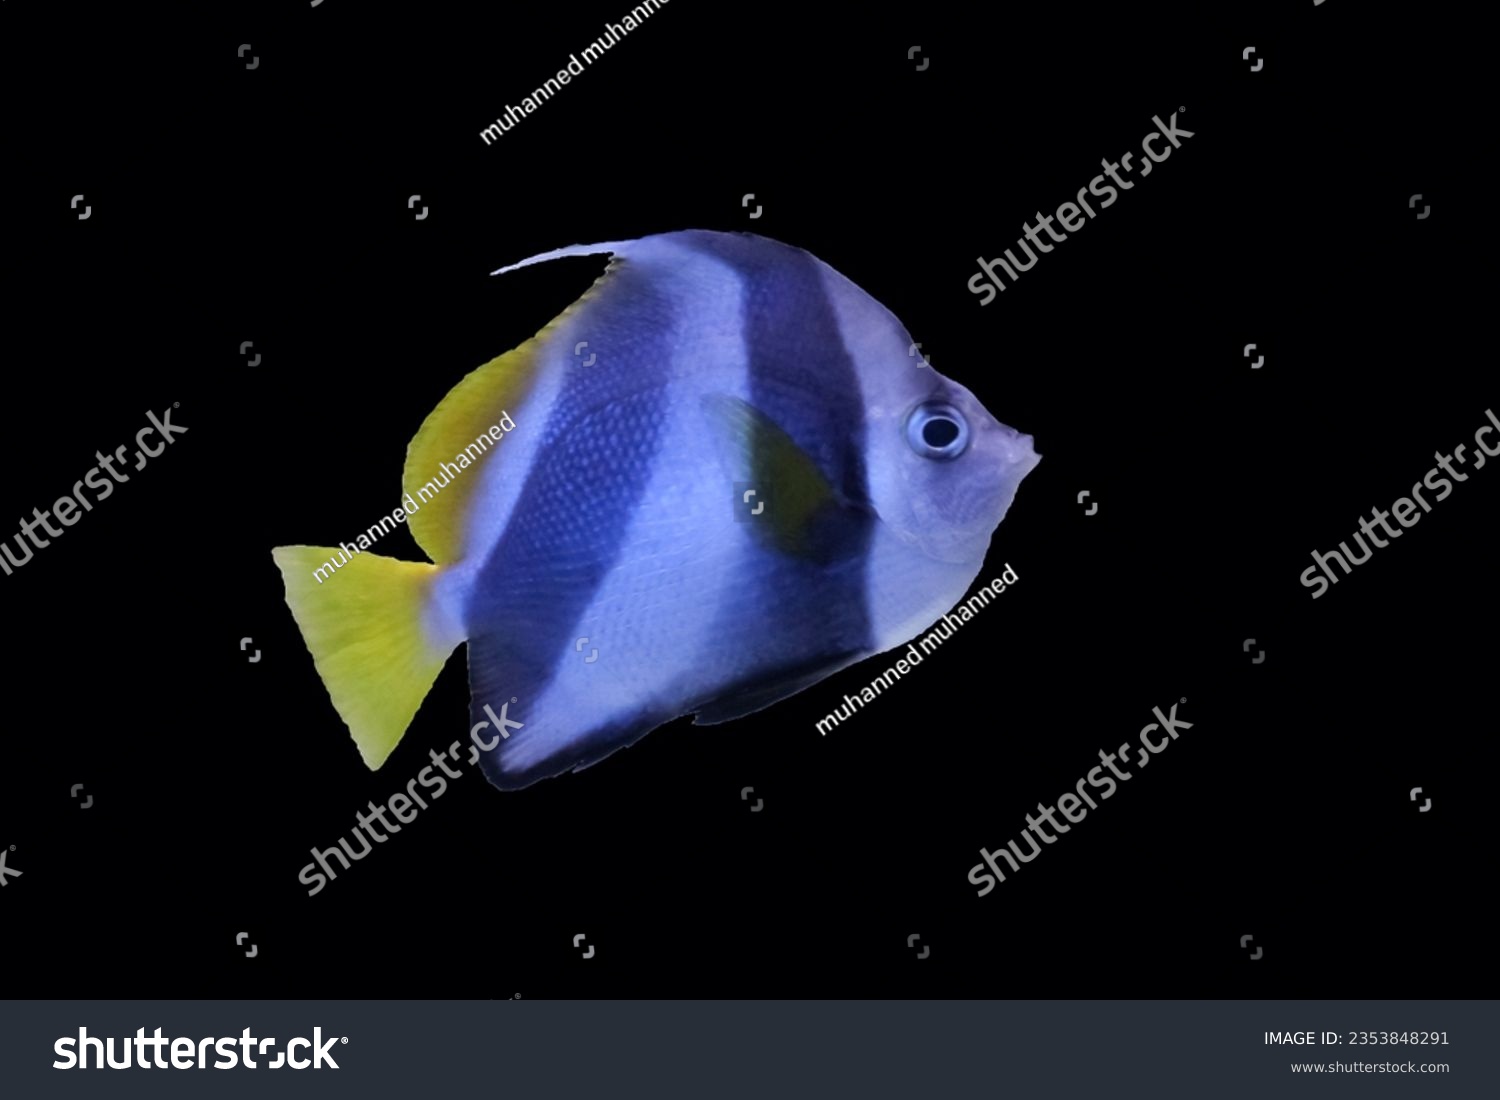 Pennant coral fish images stock photos d objects vectors